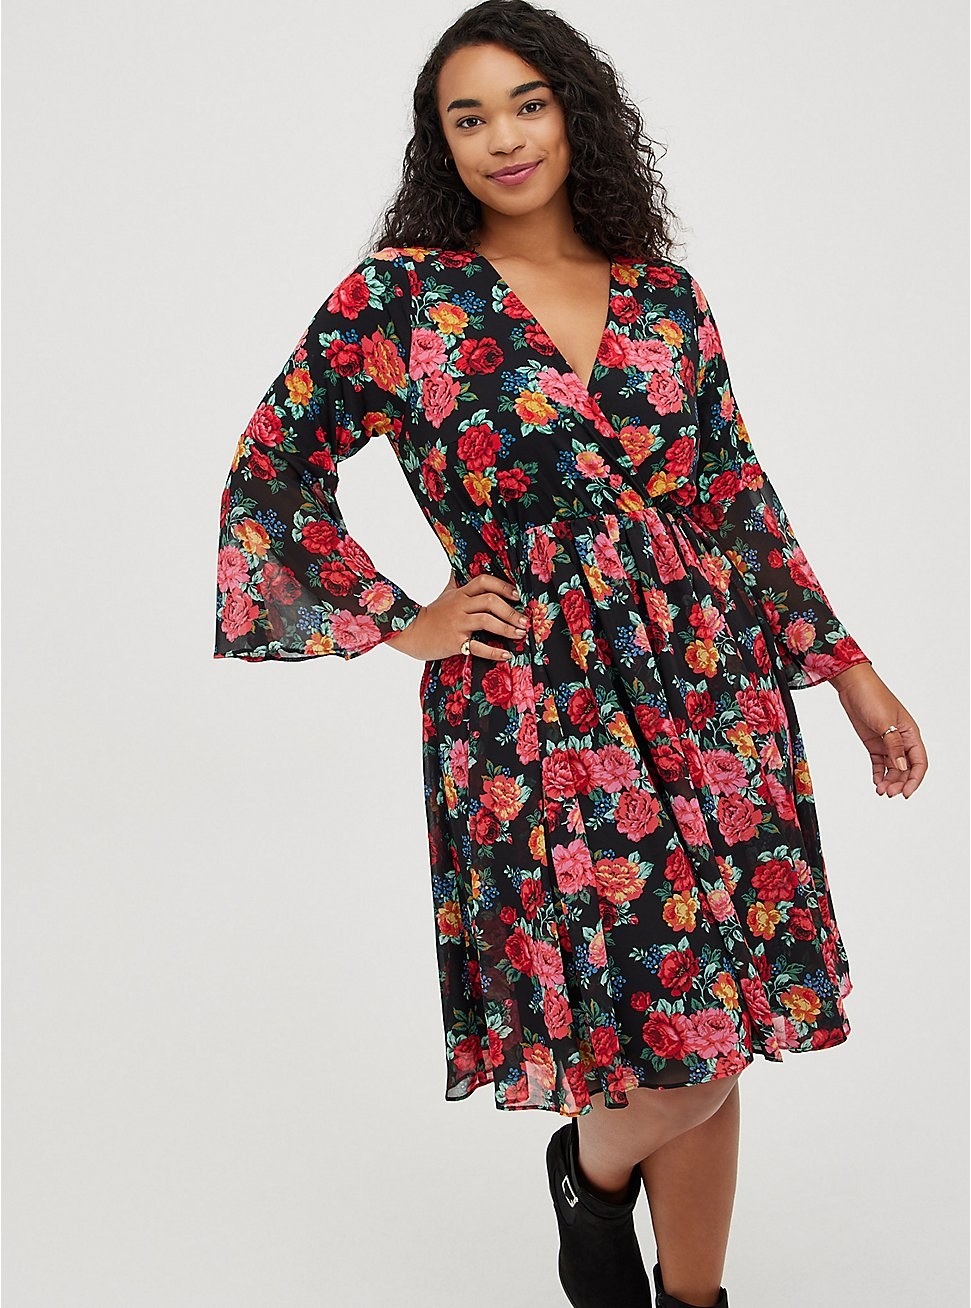 model in knee length black dress with colorful floral print and long flared sleeves